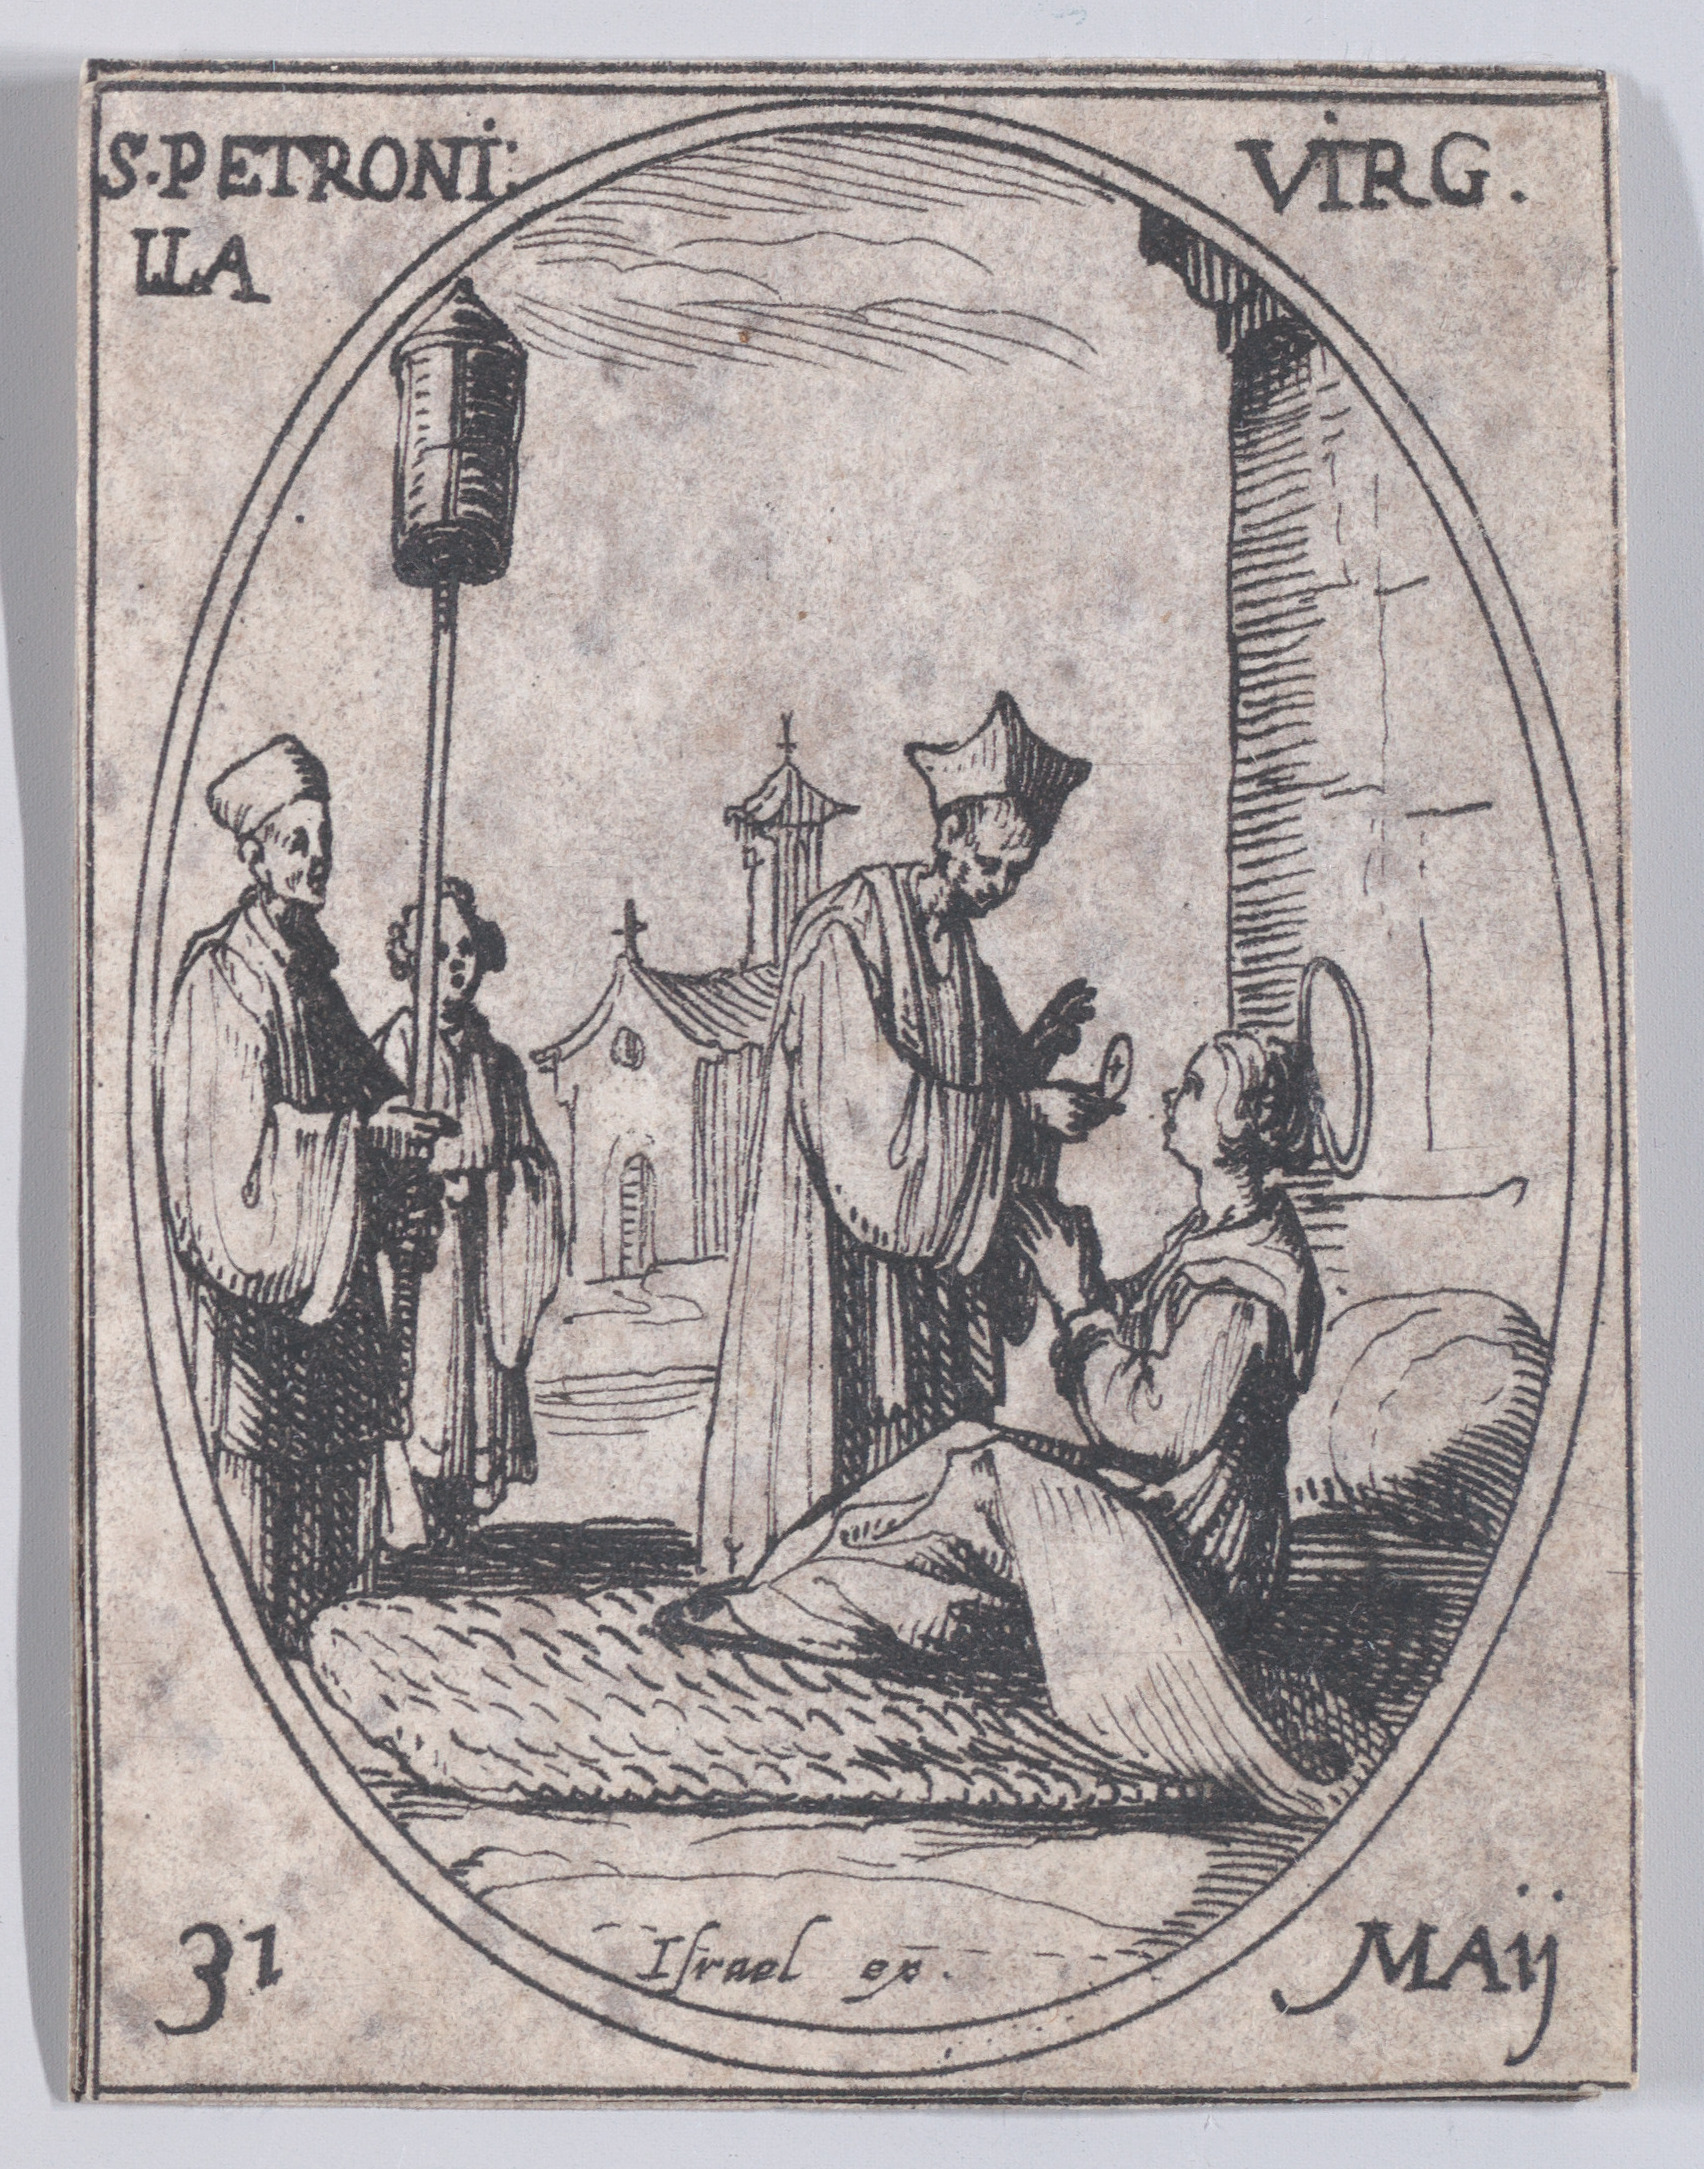 Ste. Petronille, vierge (St. Petronilla, Virgin), May 31st, from Les Images De Tous Les Saincts et Saintes de L'Année (Images of All of the Saints and Religious Events of the Year), Jacques Callot (French, Nancy 1592–1635 Nancy), Etching; second state of two (Lieure)